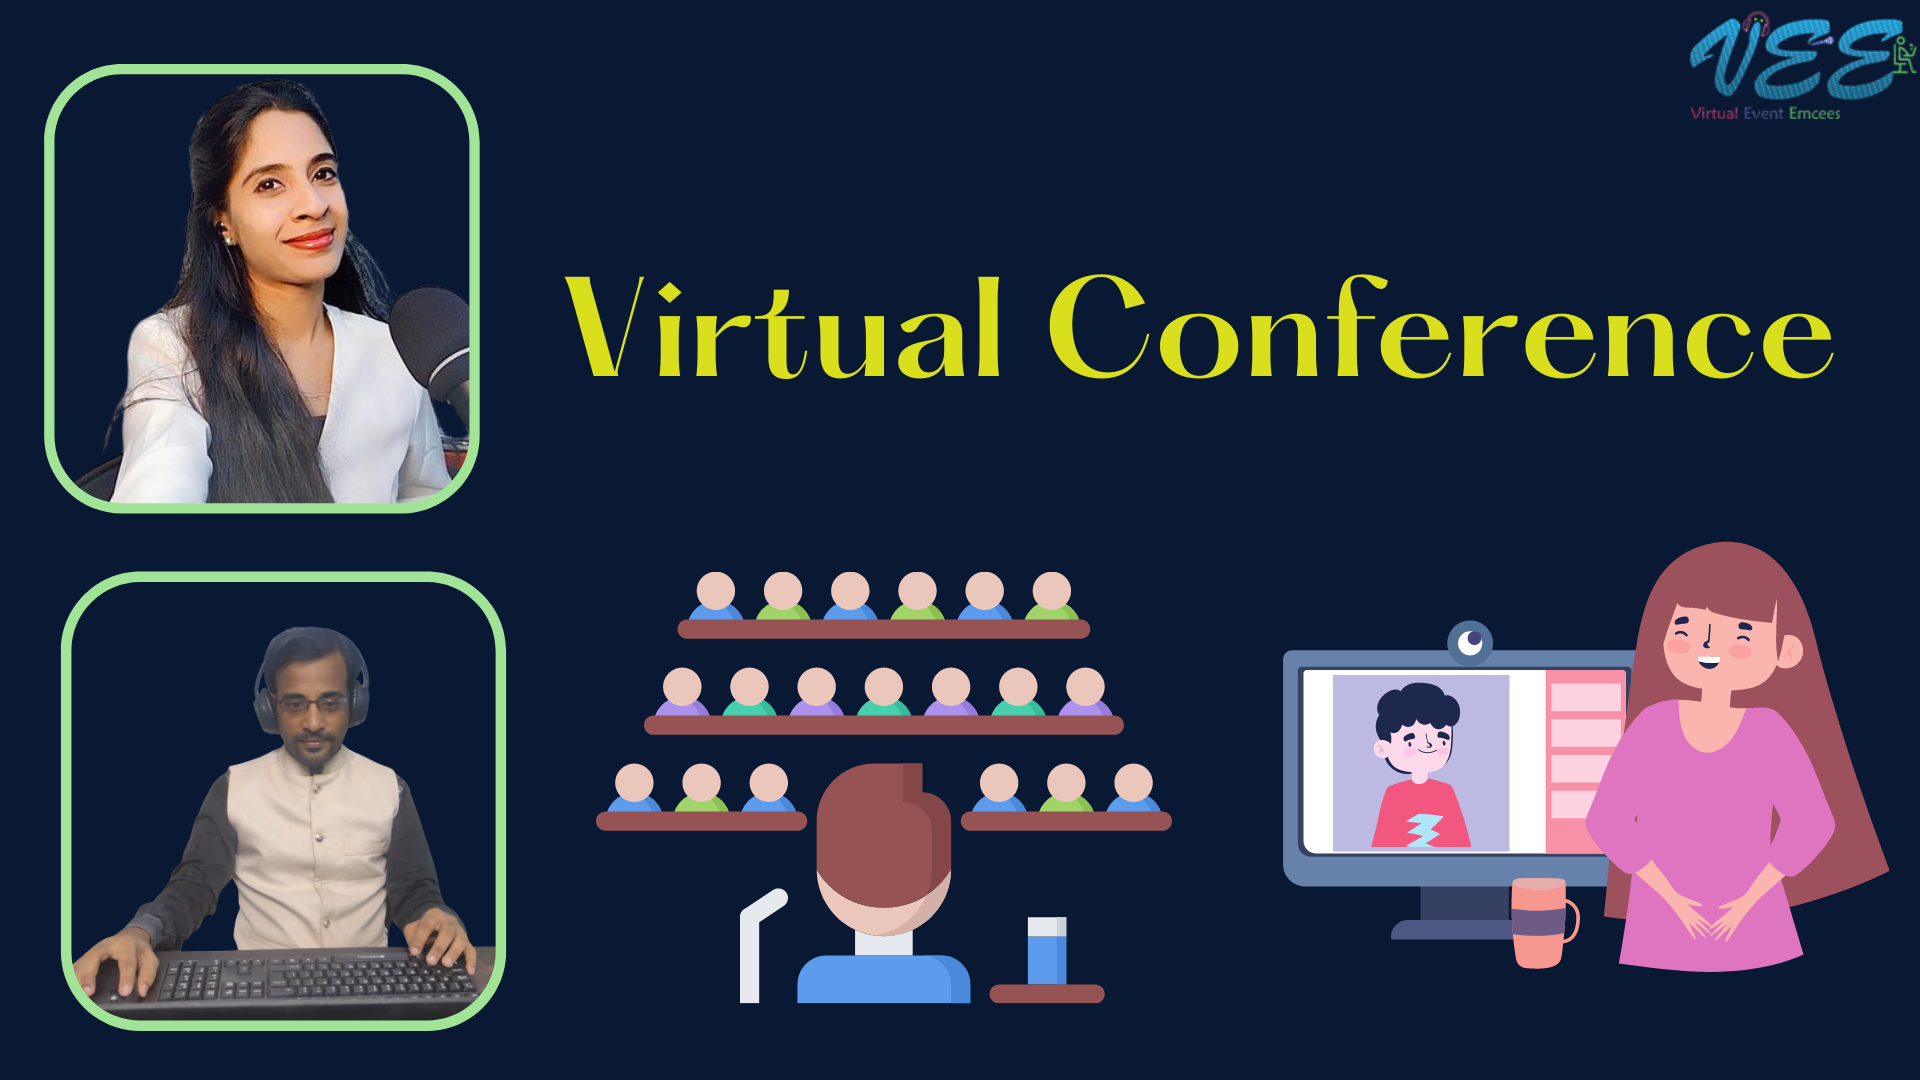 Event Plan for Virtual Conference